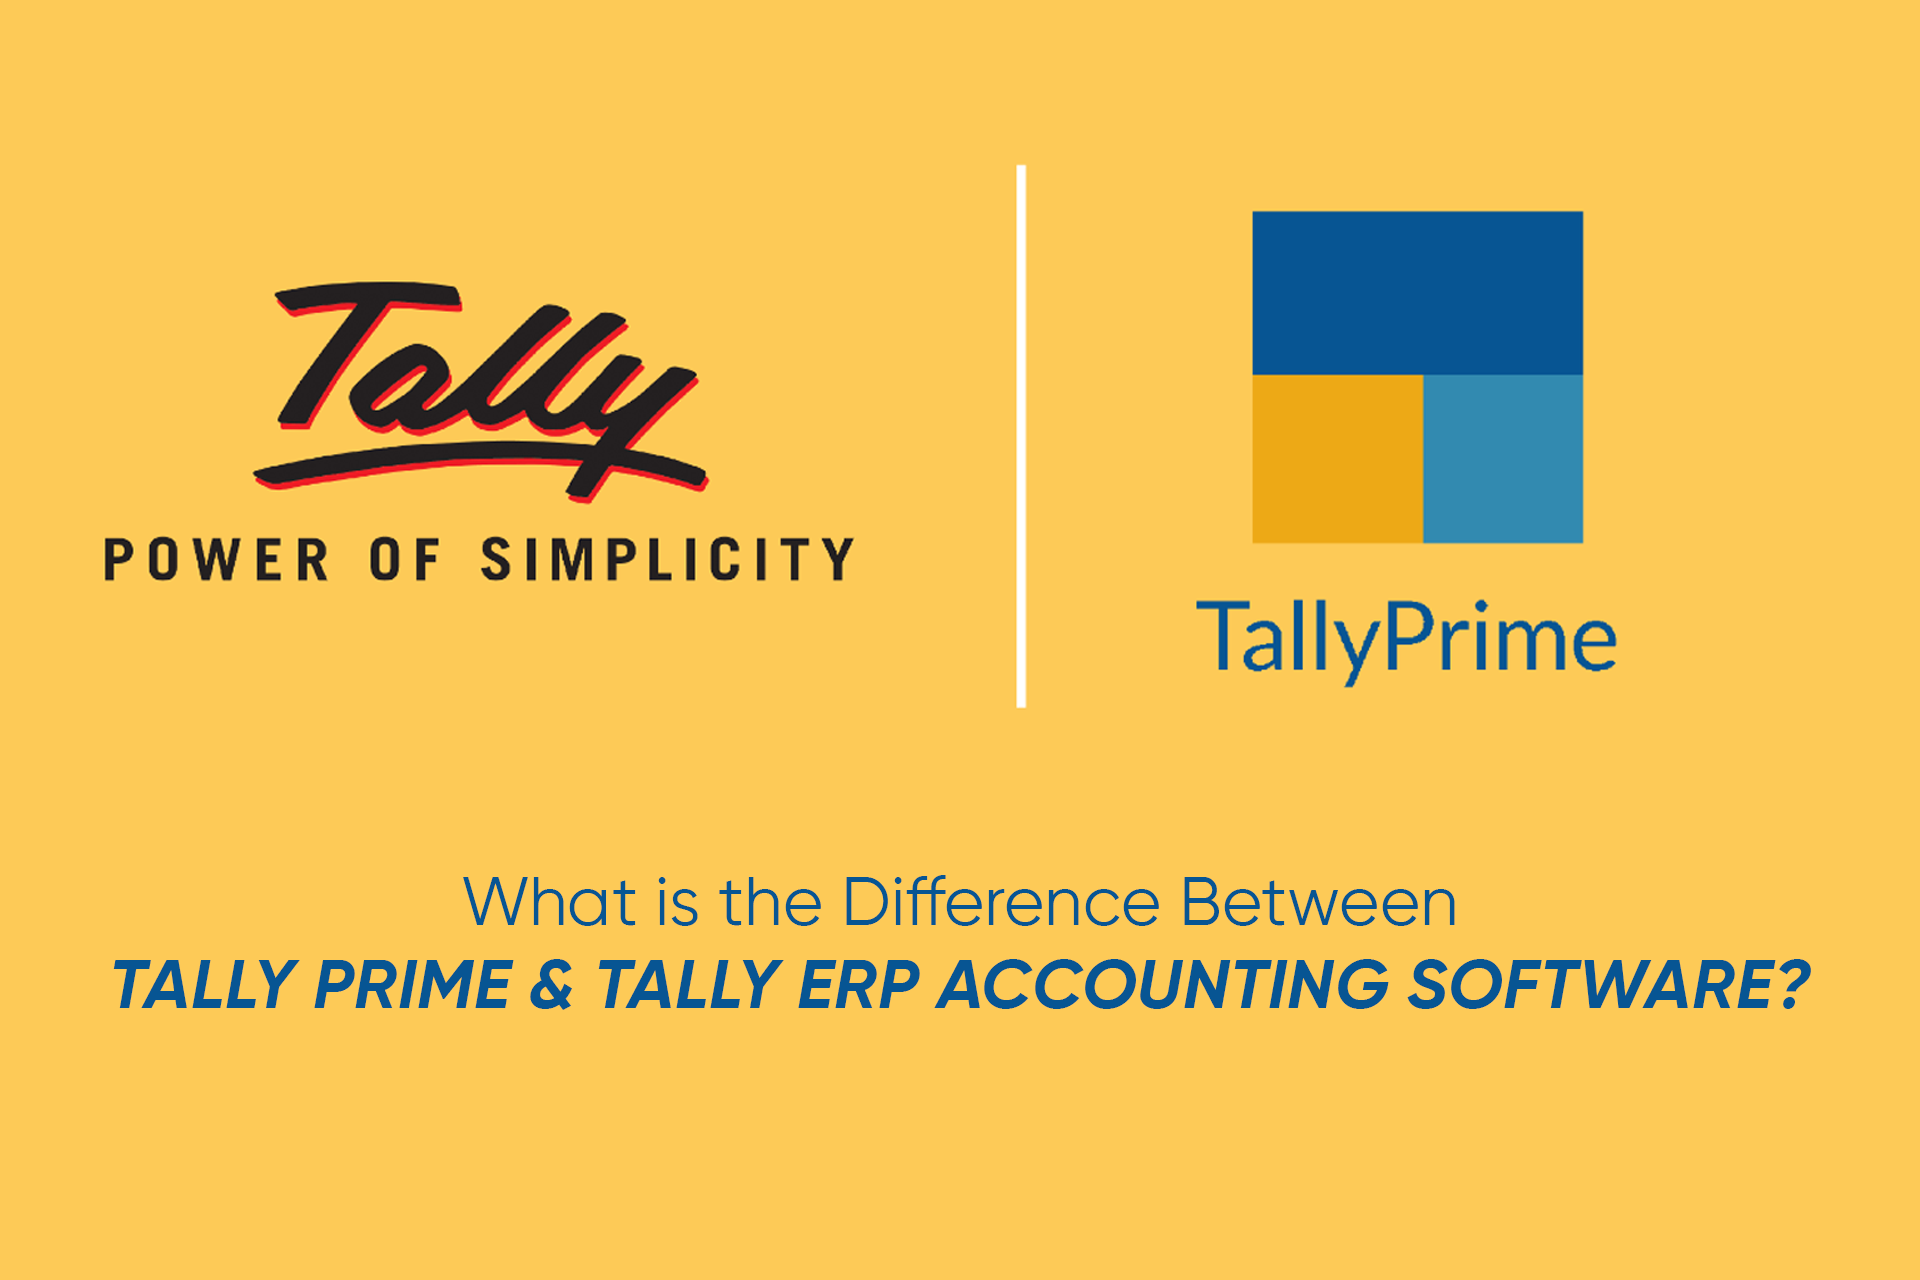 What is the Difference Between Tally Prime & Tally ERP Accounting Software?